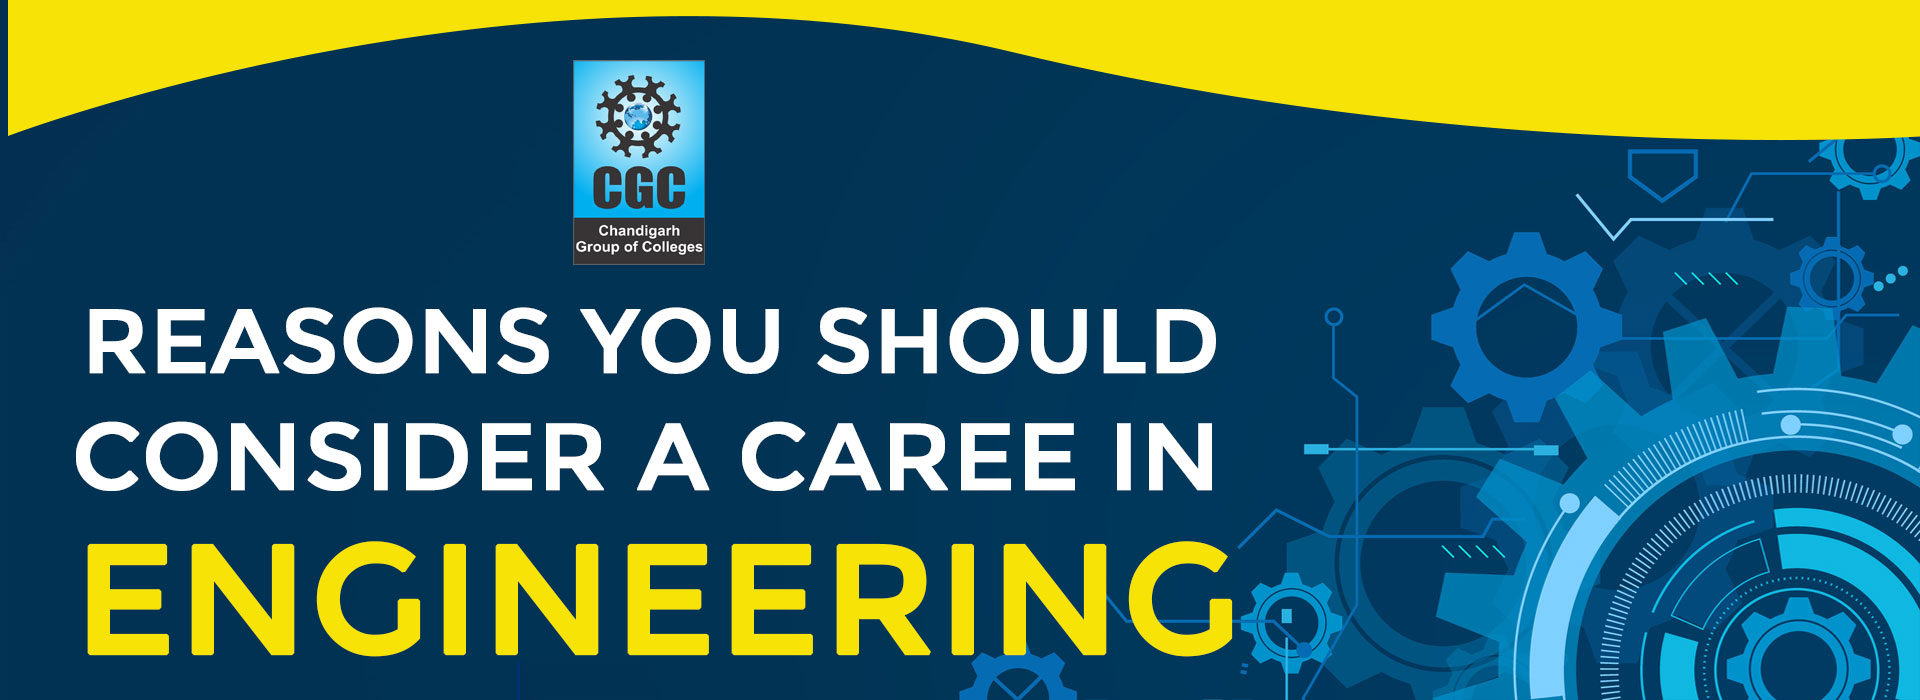 Reasons You Should Consider a Career in Engineering 